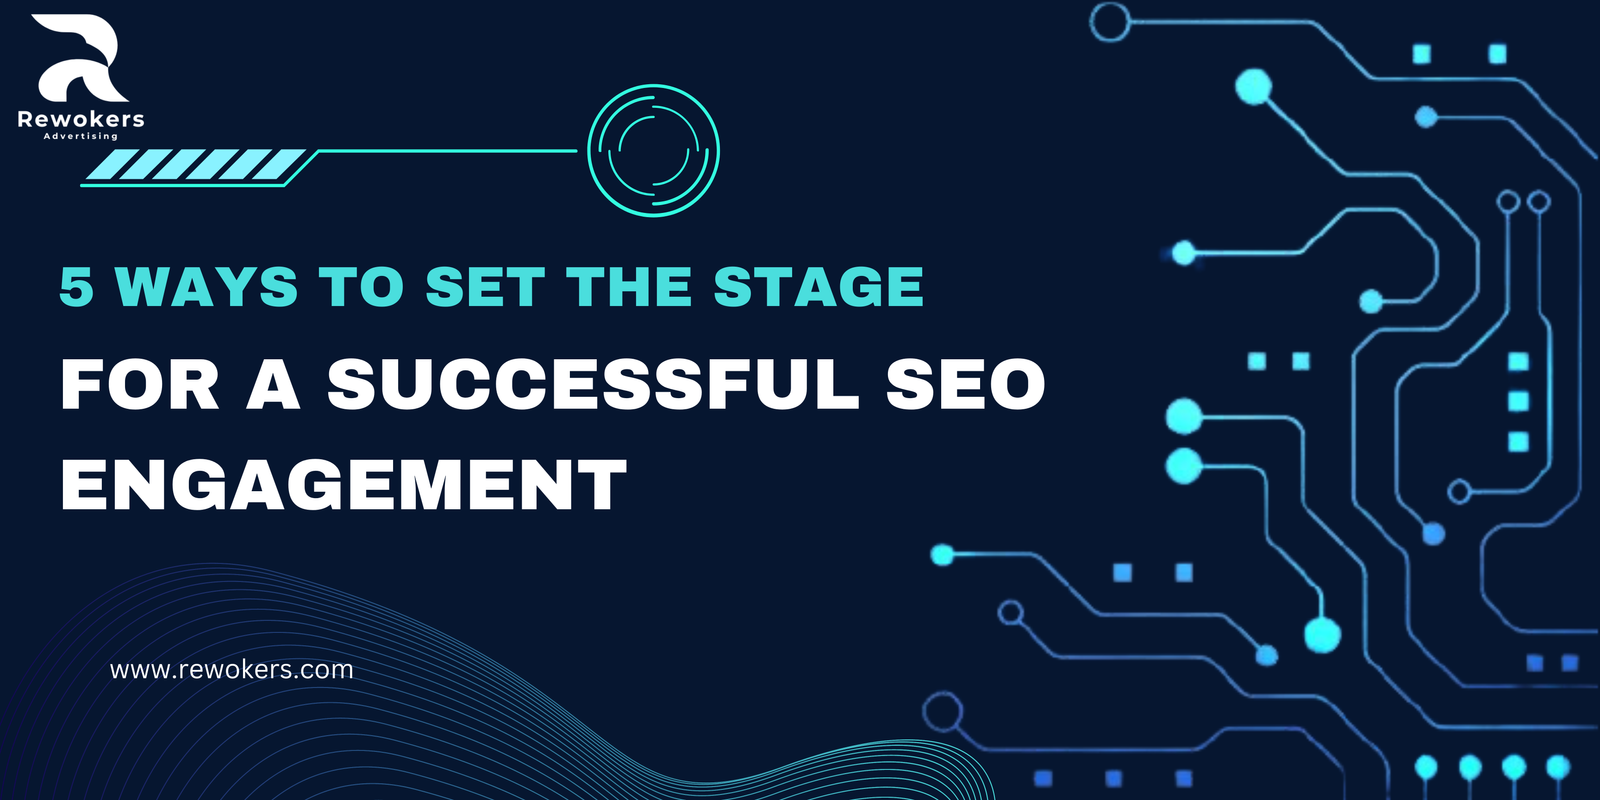 5 Ways to Set the Stage for a Successful SEO Engagement